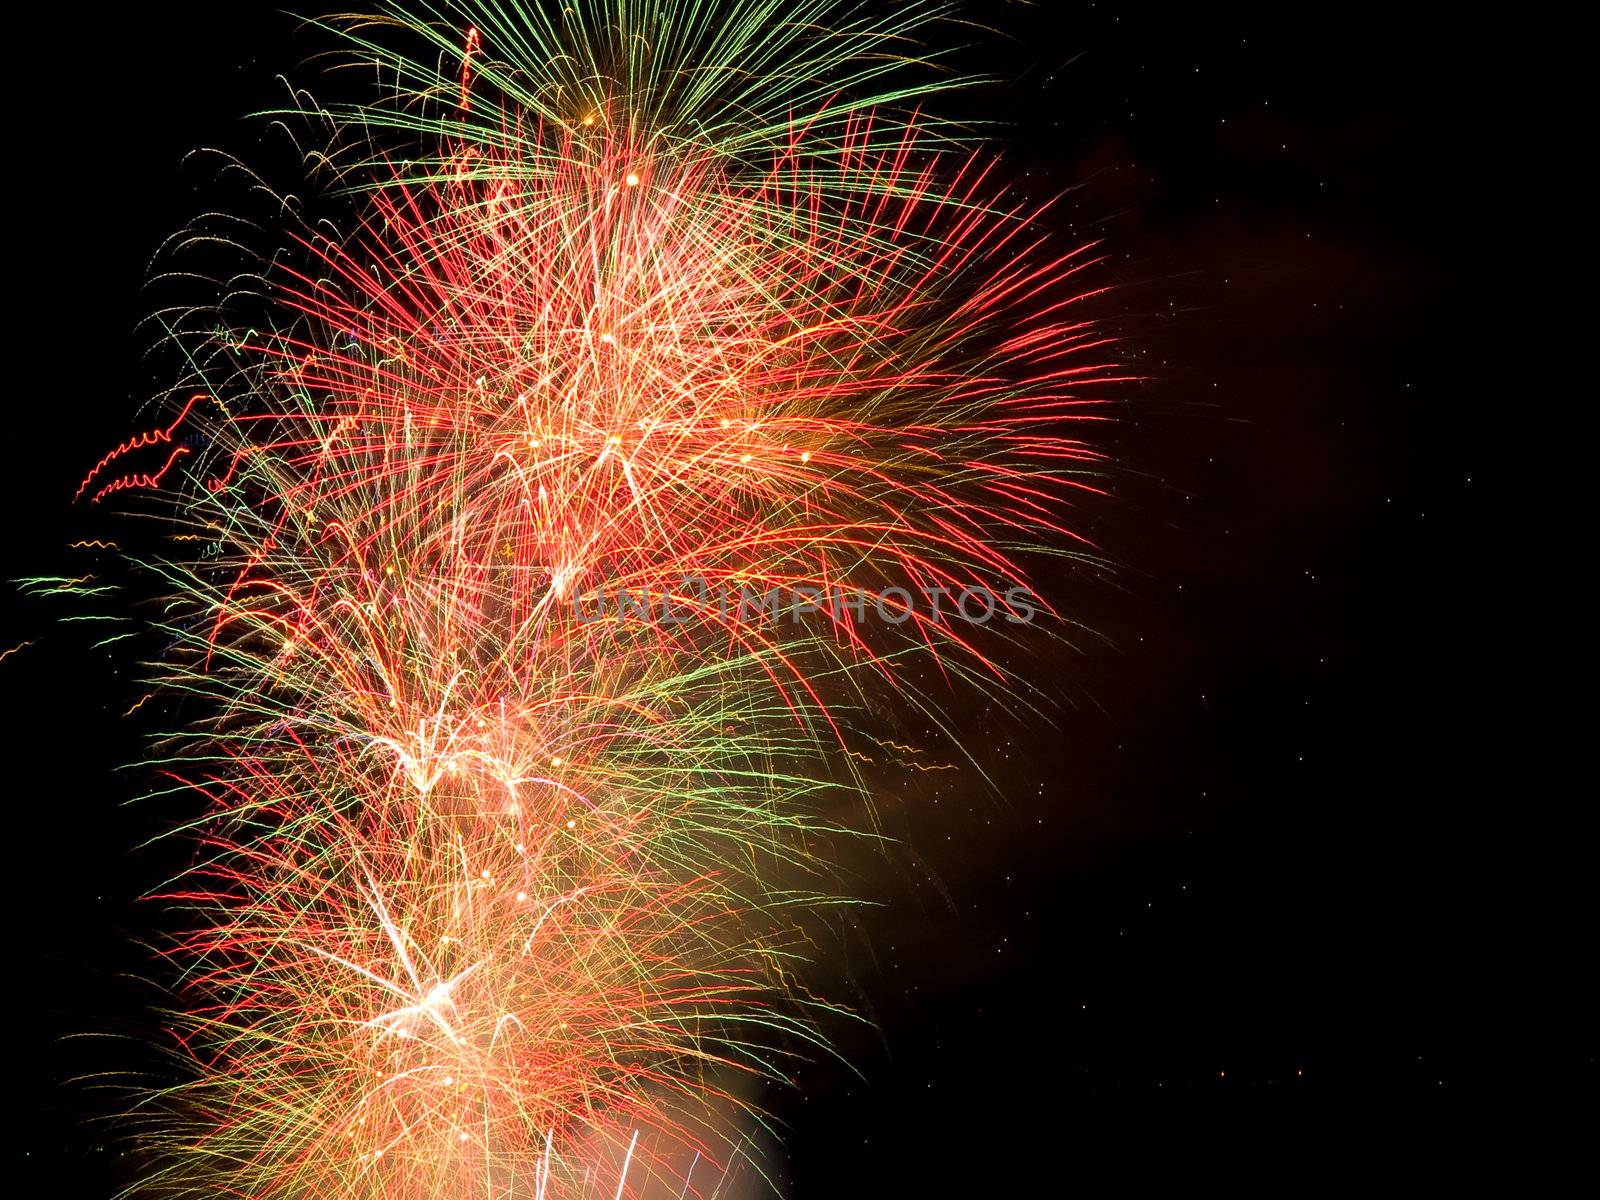 Long Exposure of Multicolored Fireworks Against a Black Sky